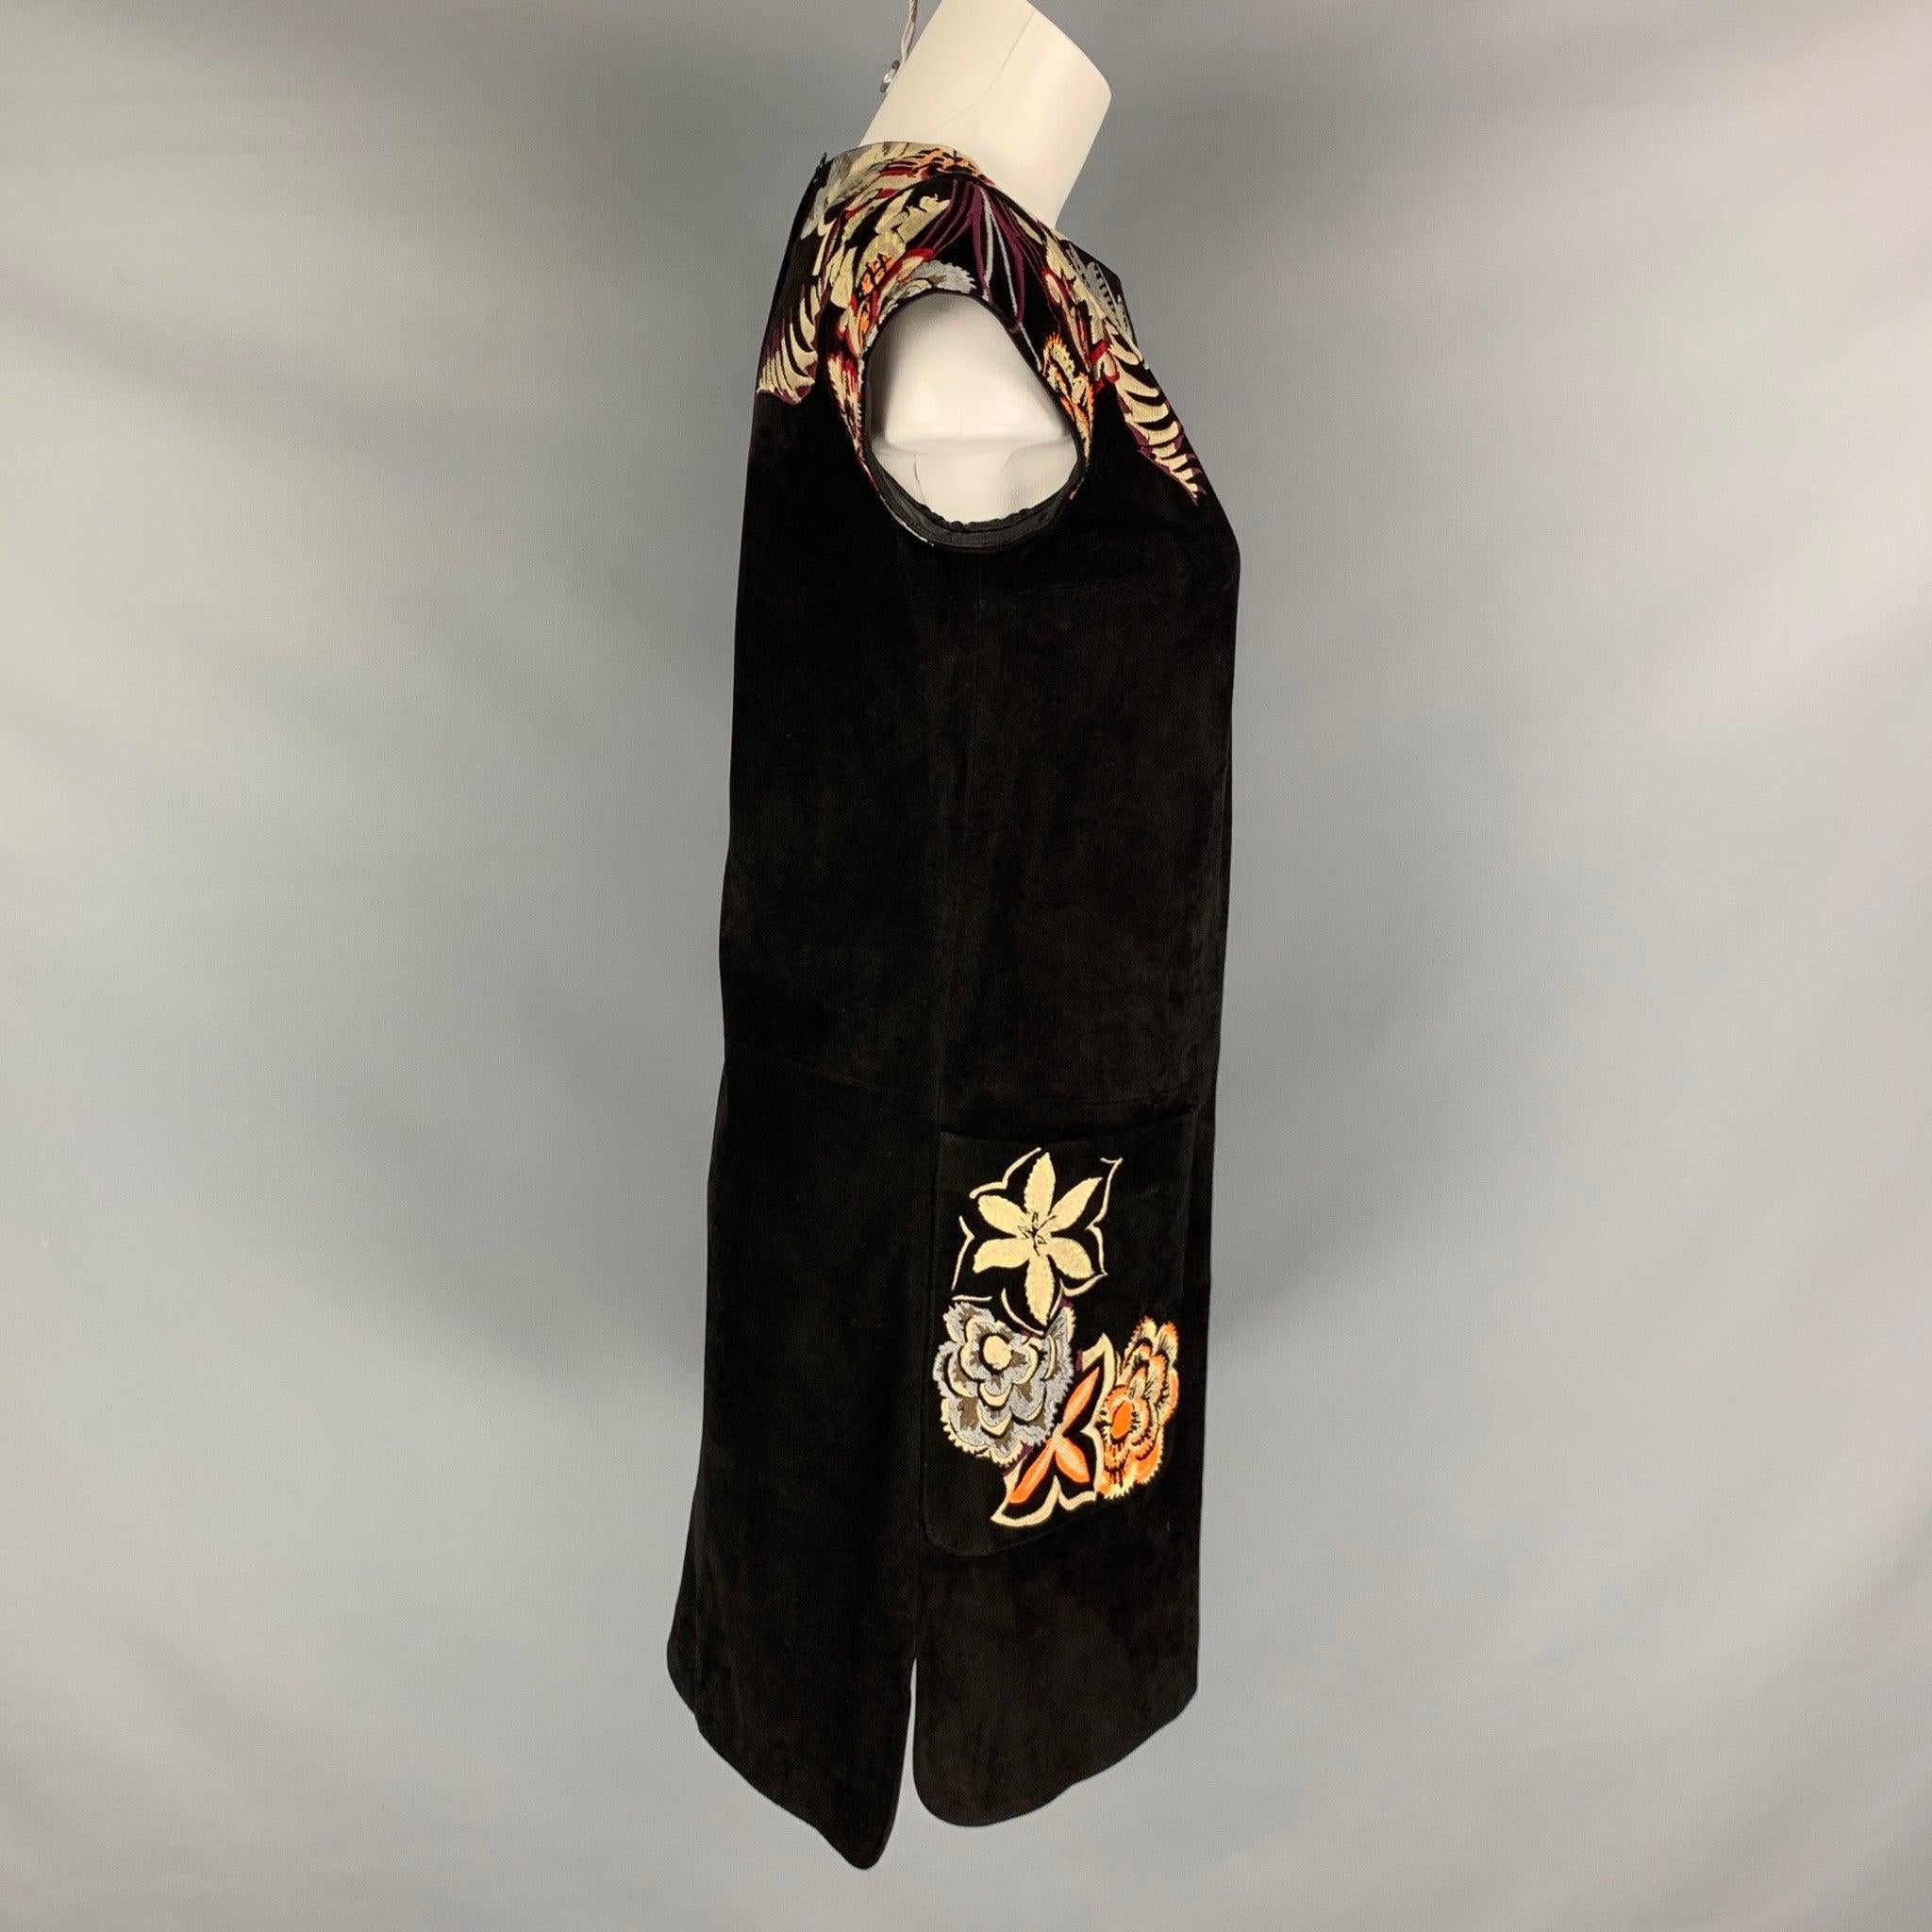 ETRO dress comes in a black goat suede featuring a multi-color embroidery, A-line style, frontal pockets, cap sleeve, and center back zip up closure. Made in Italy.Very Good Pre-Owned Condition. 

Marked:  40 

Measurements: 
 
Shoulder: 13 inches